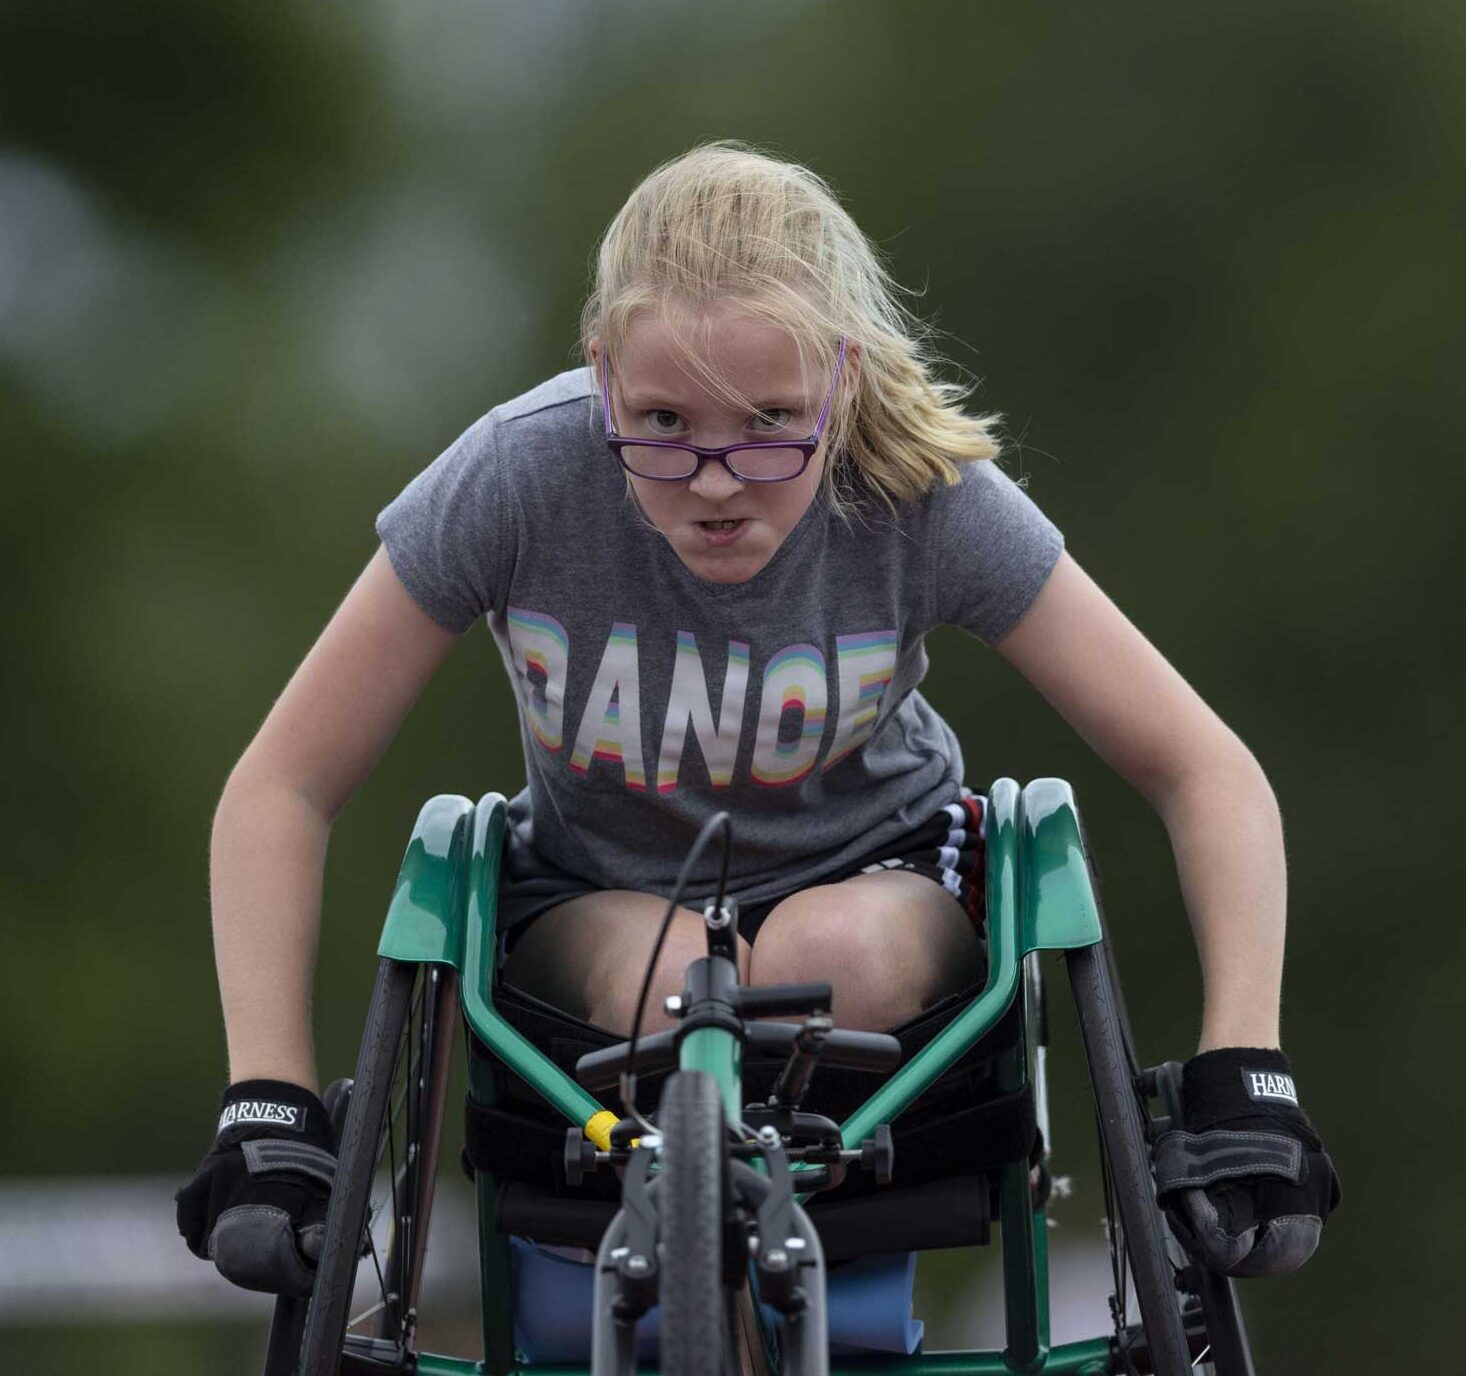 Wheelchair athlete with a determined look on her face